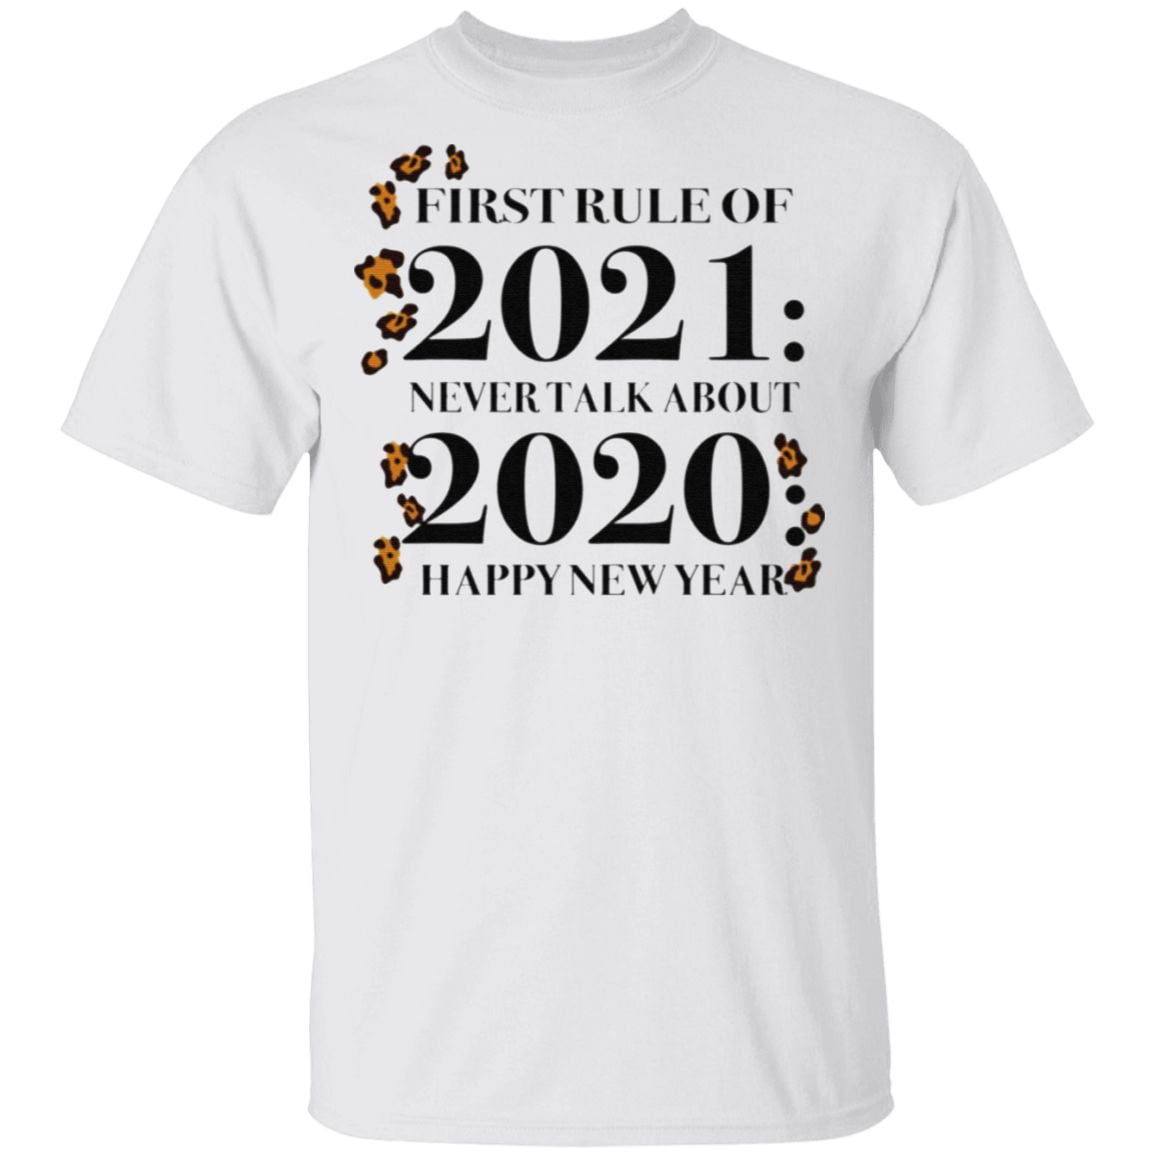 First Rule Of 2021 Never Talk About 2020 Happy New Year T Shirt